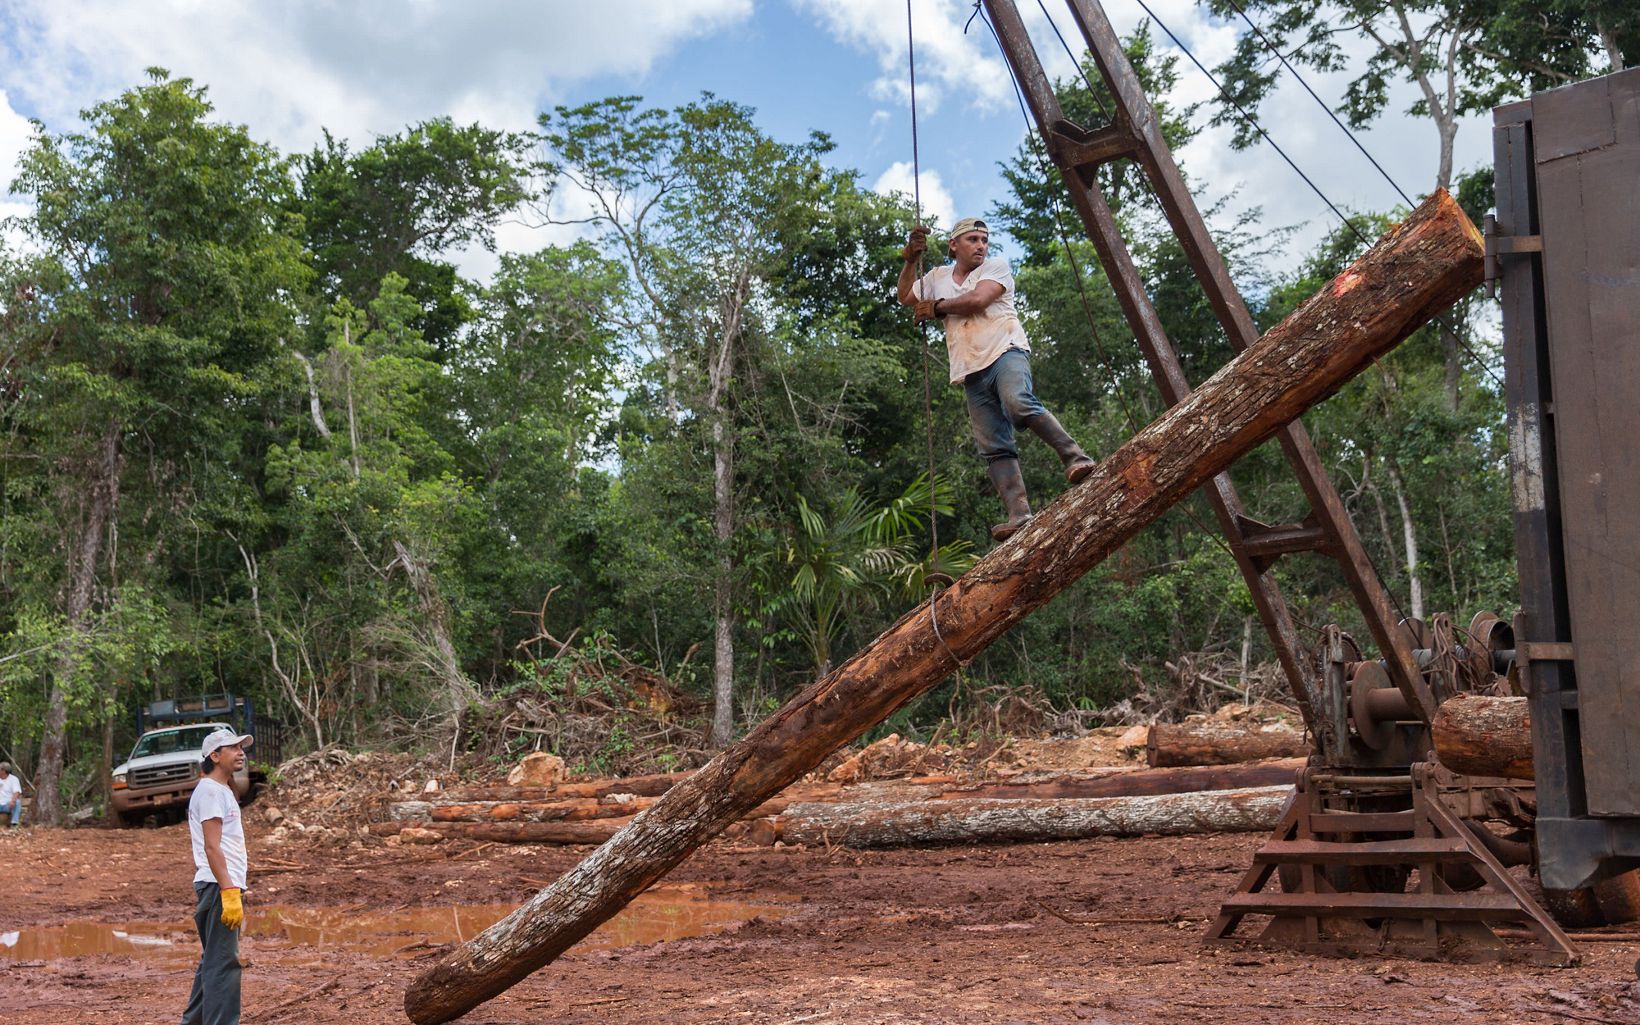 Working forests account for one-fifth of all tropical forests, and timber demand is rising. This means better forest management, not just preservation, is required to protect these important ecosystems. © Erich Schlegel